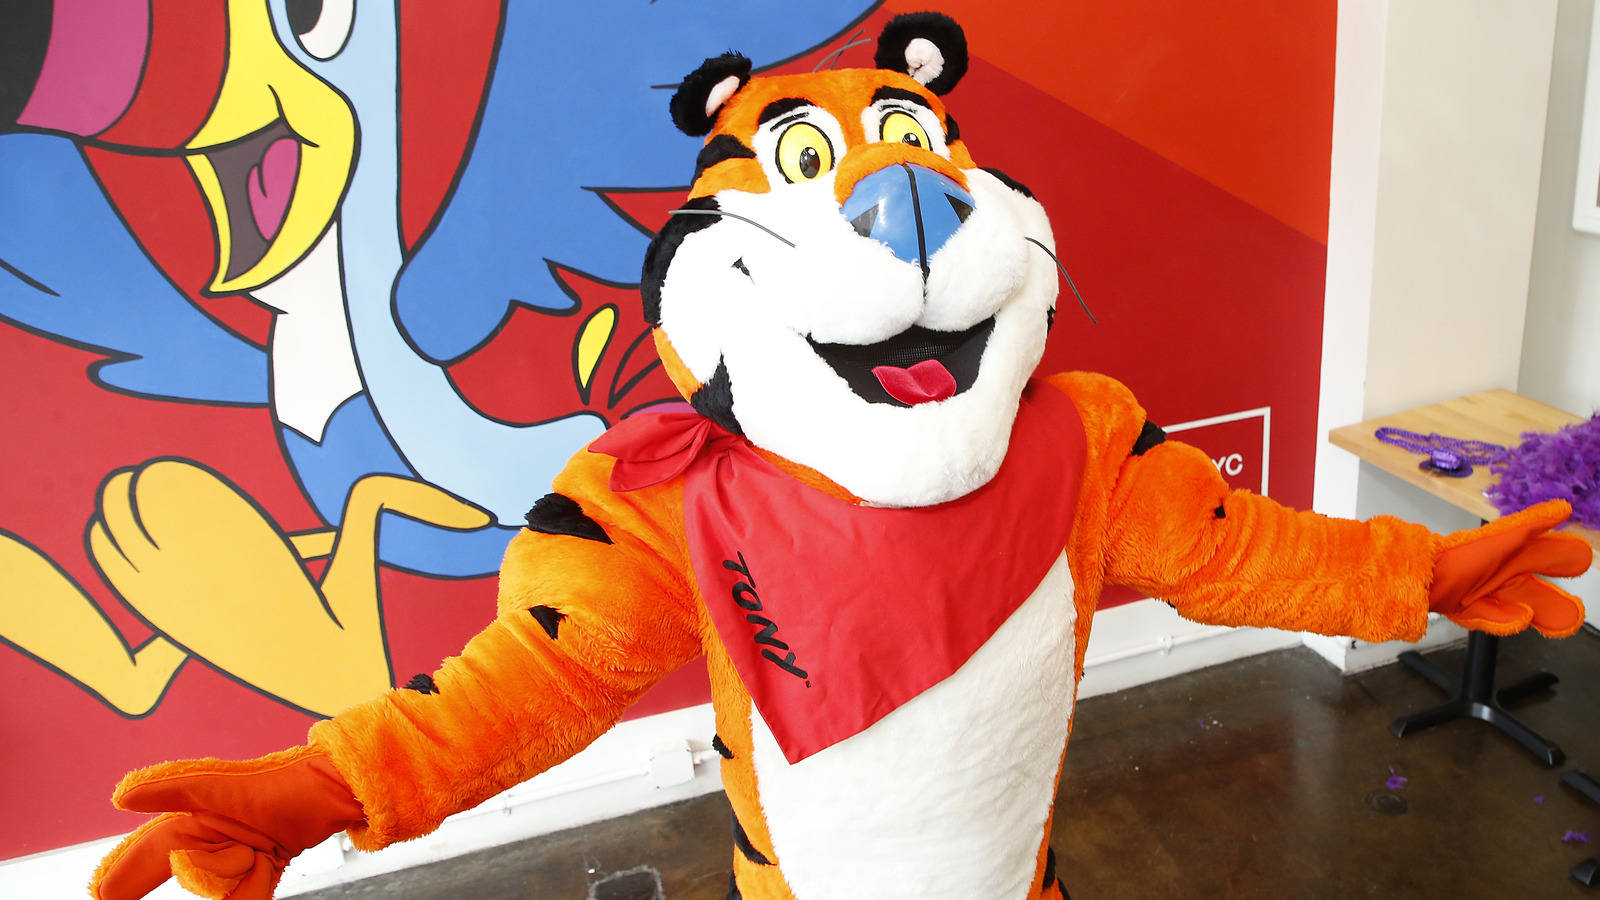 What You Don't Know About Frosted Flakes' Tony The Tiger.